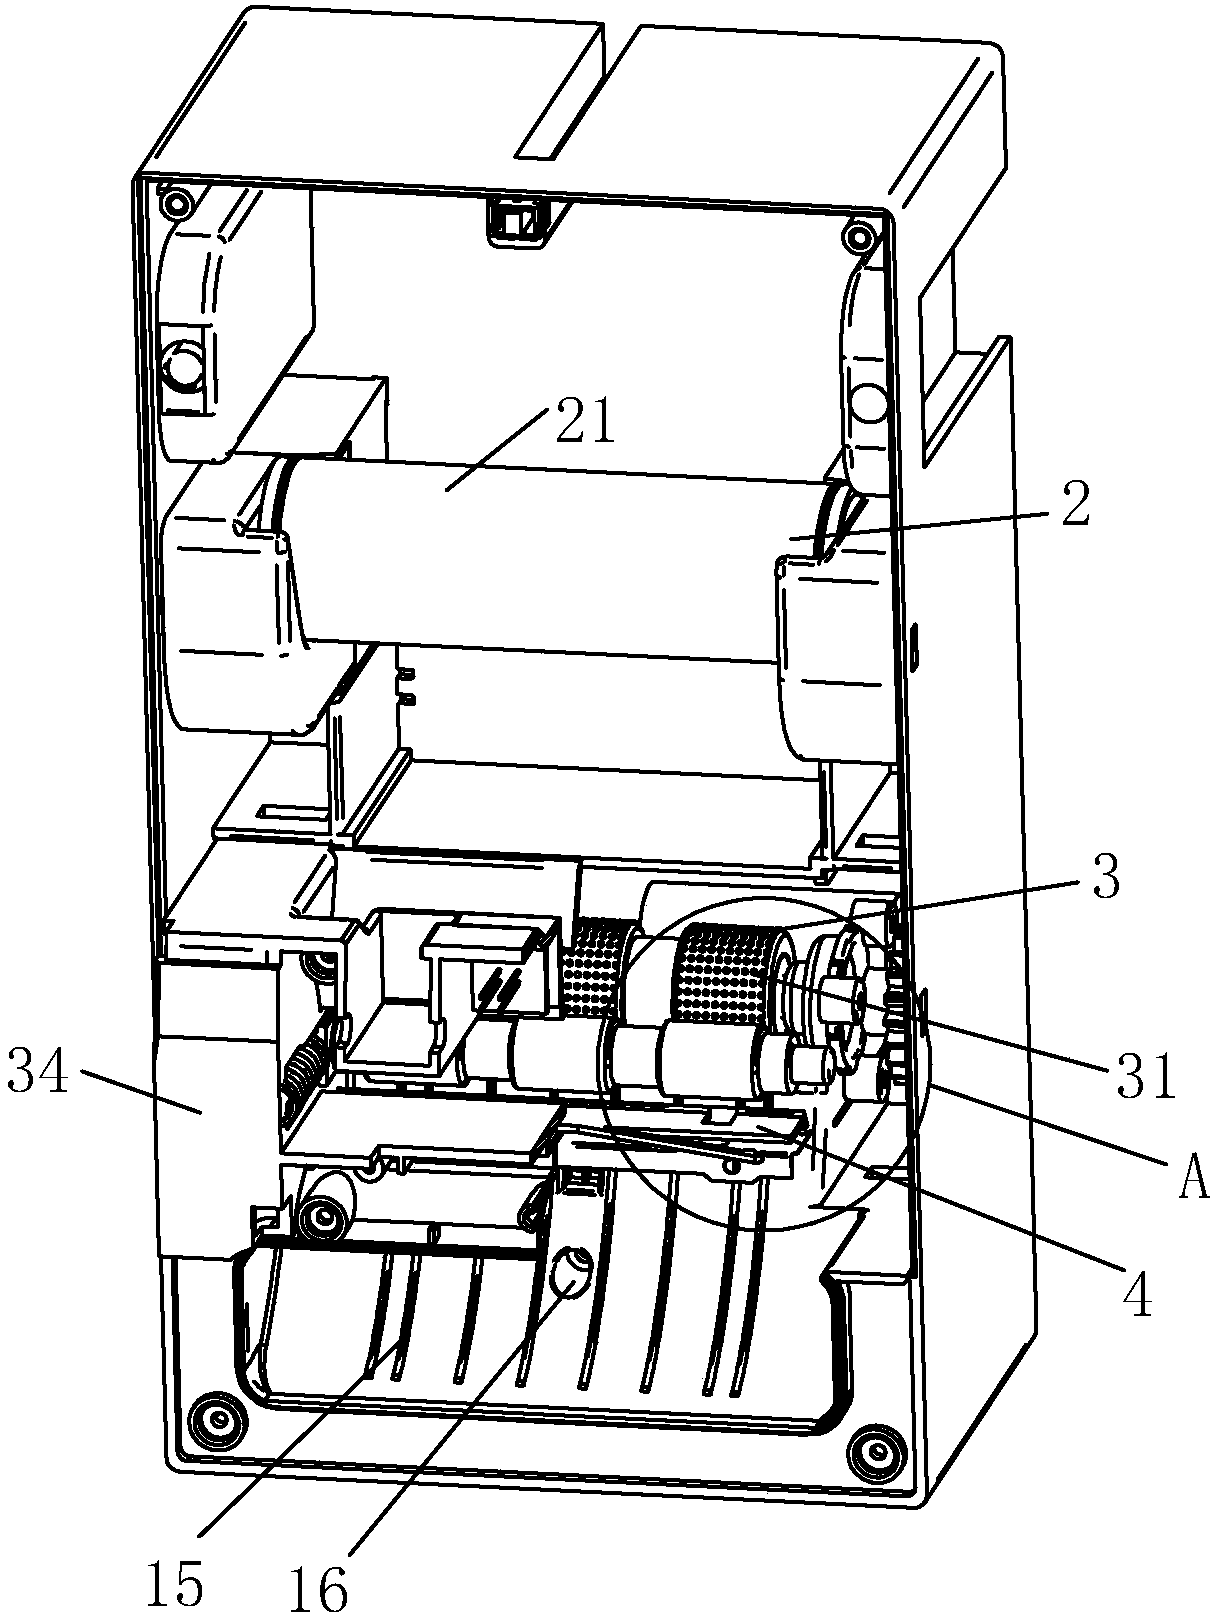 Paper extraction device